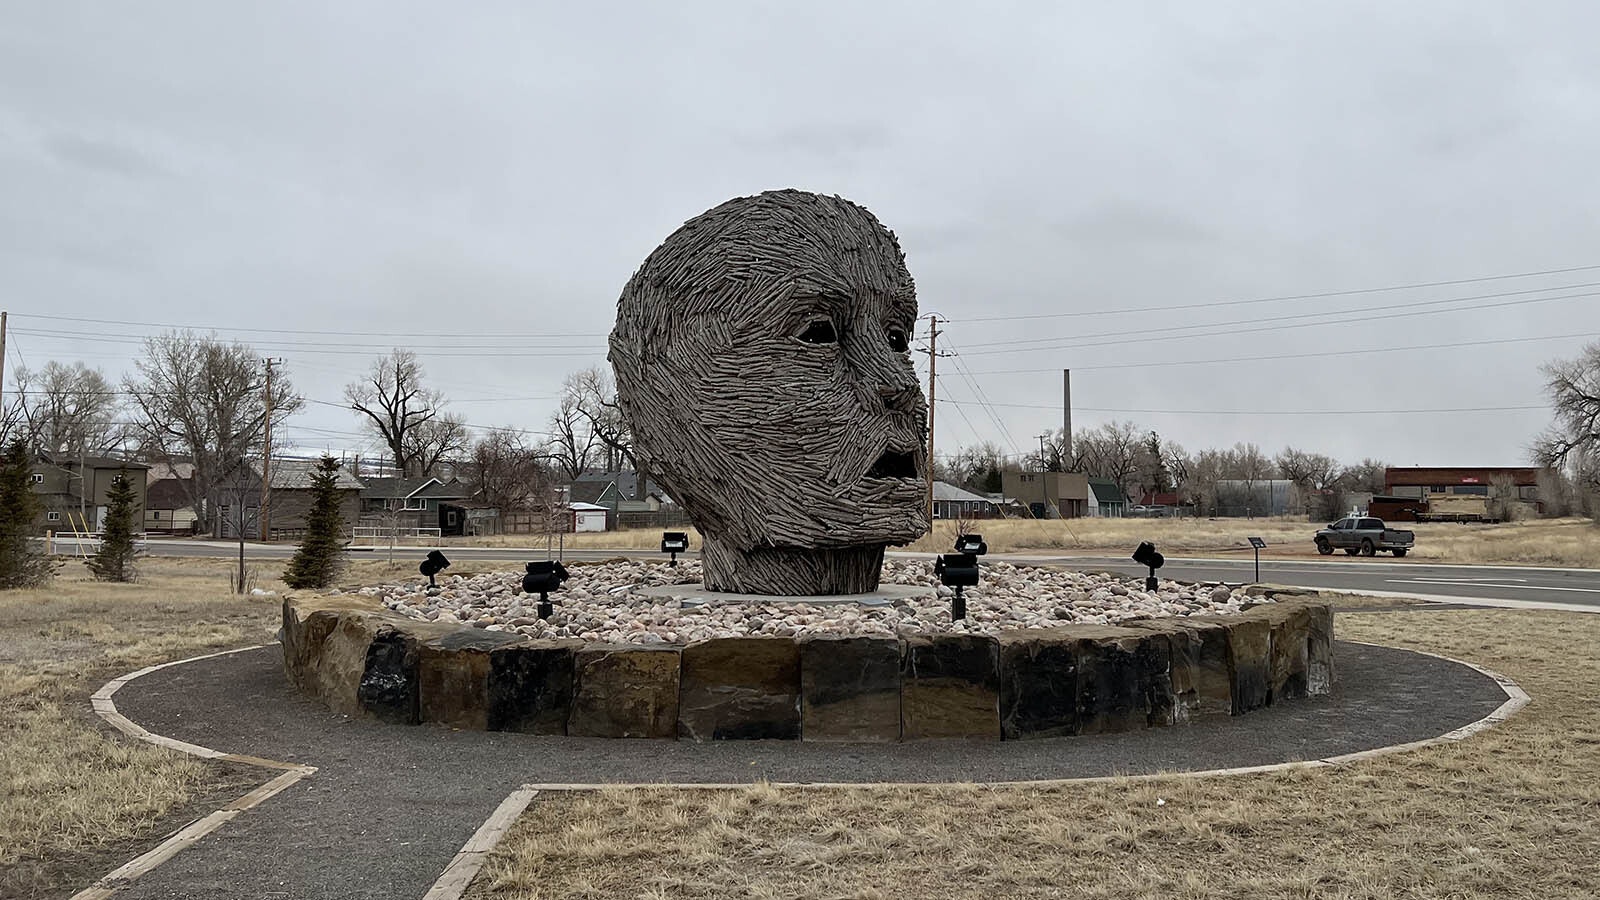 The “Exhaling Dissolution” sculpture at the intersection of Clark Street and Snowy Range Road in Laramie is scheduled to soon be rotated out for another public art display. Locals have taken to calling it “the Joe Biden head” because many think it bears a resemblance to the current U.S. President.